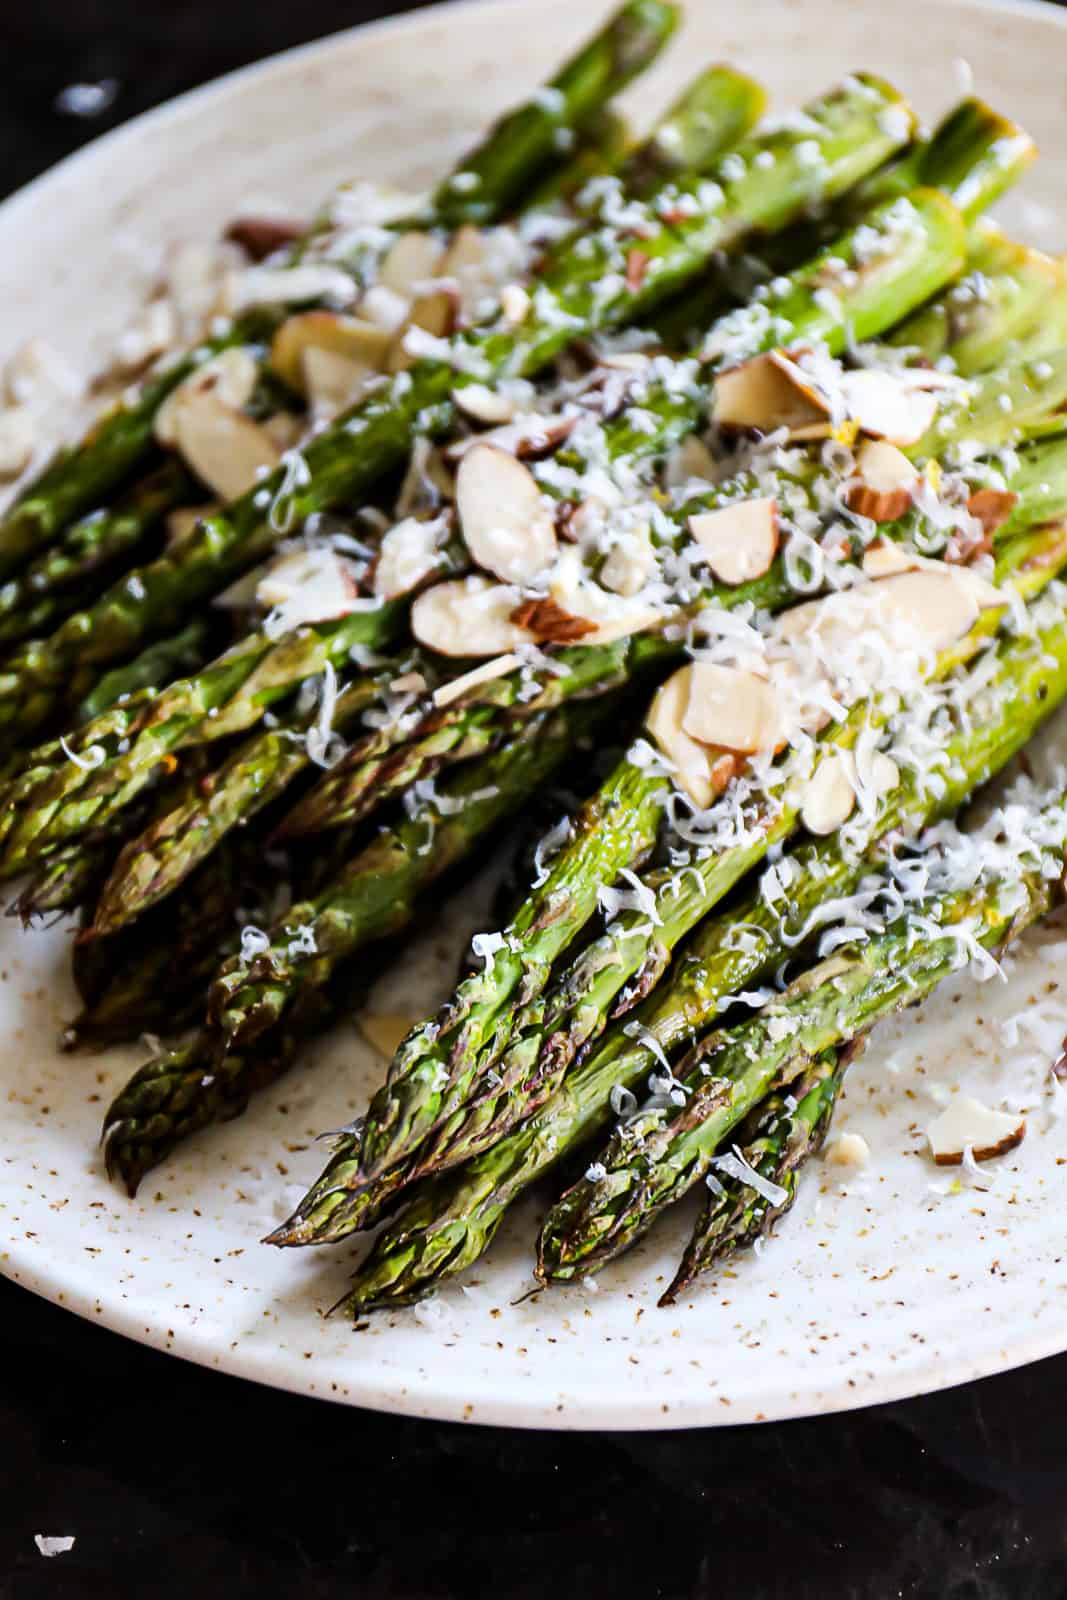 Traeger Smoked Asparagus Side Dish With Parmesan Cheese And Almonds